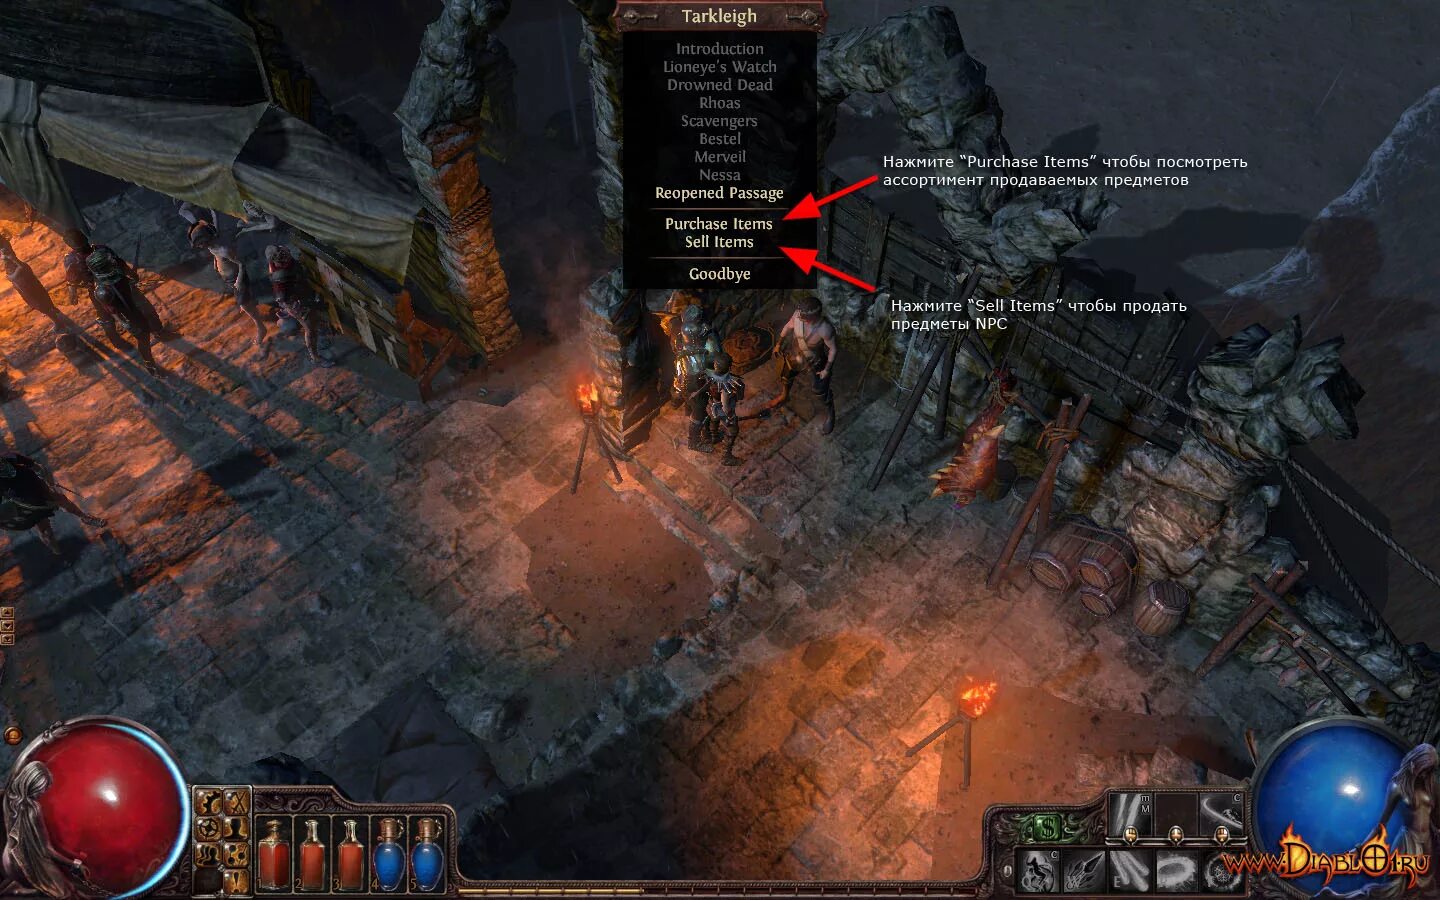 Poe patch. Path of Exile 1. Path of Exile Интерфейс. POE 2 Интерфейс. POE геймплей.